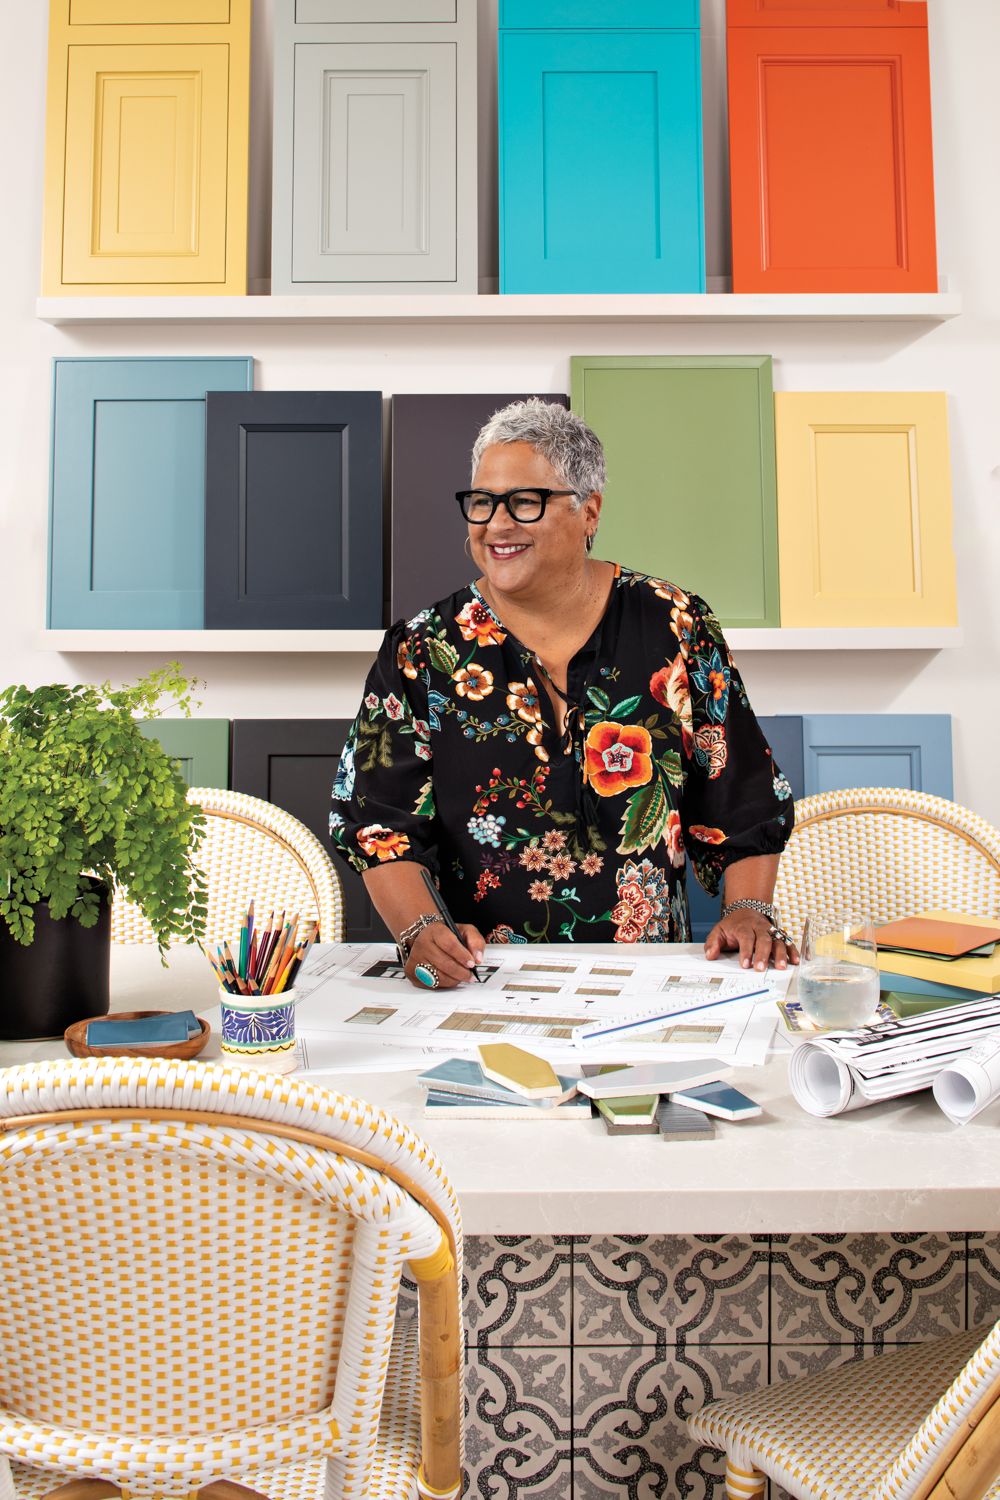 Caren Rideau standing over a work table with colorful cabinetry samples on a shelf behind her